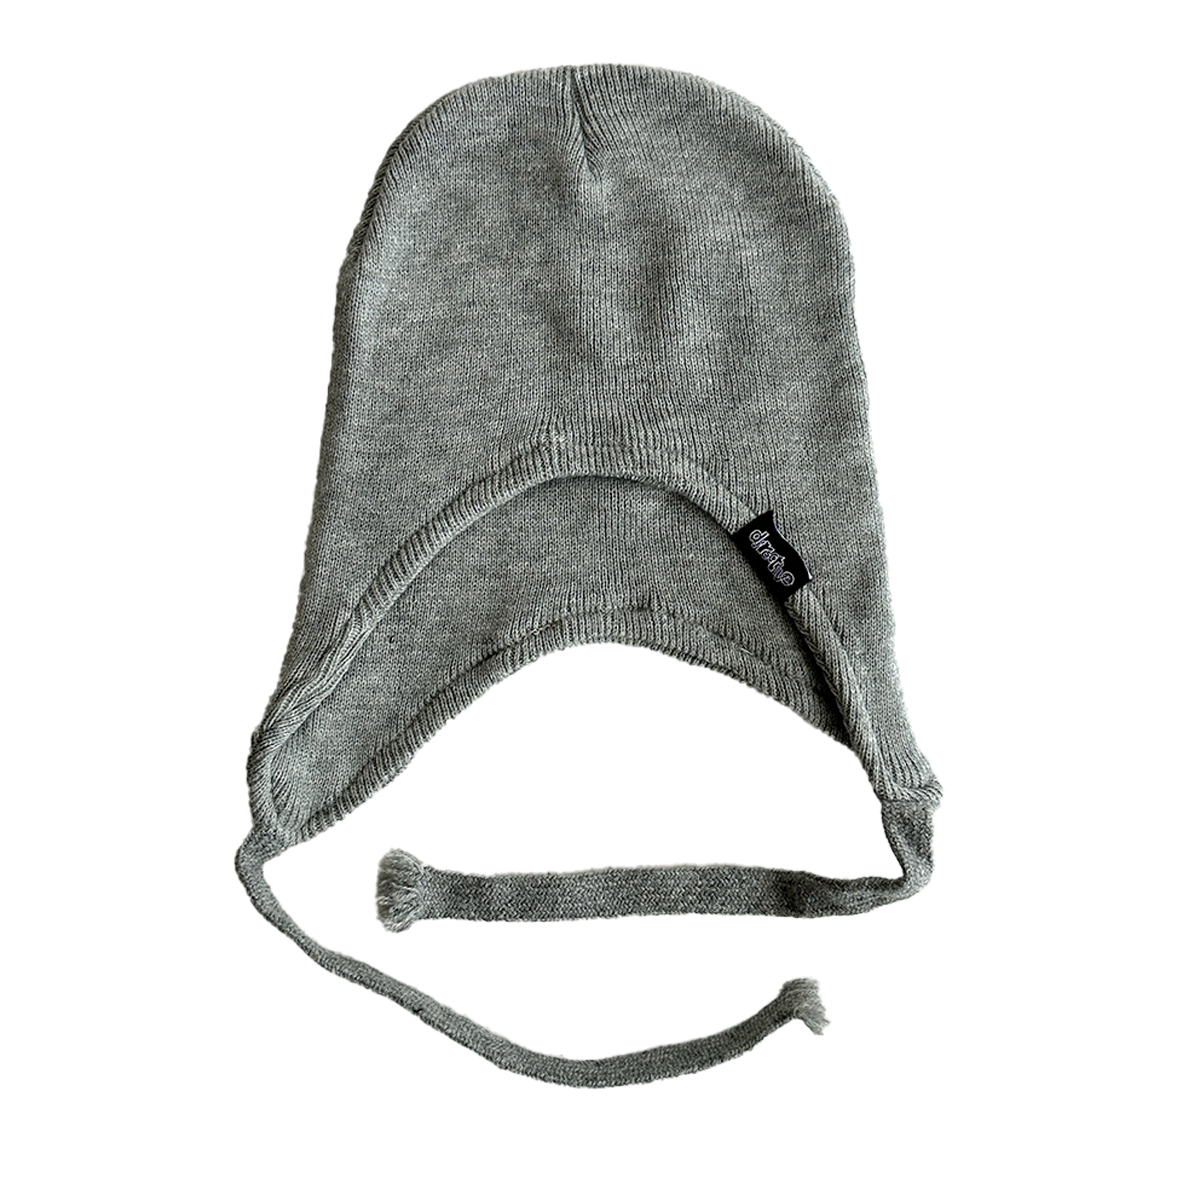 Directive Ear Flap Beanie - Assorted Colors